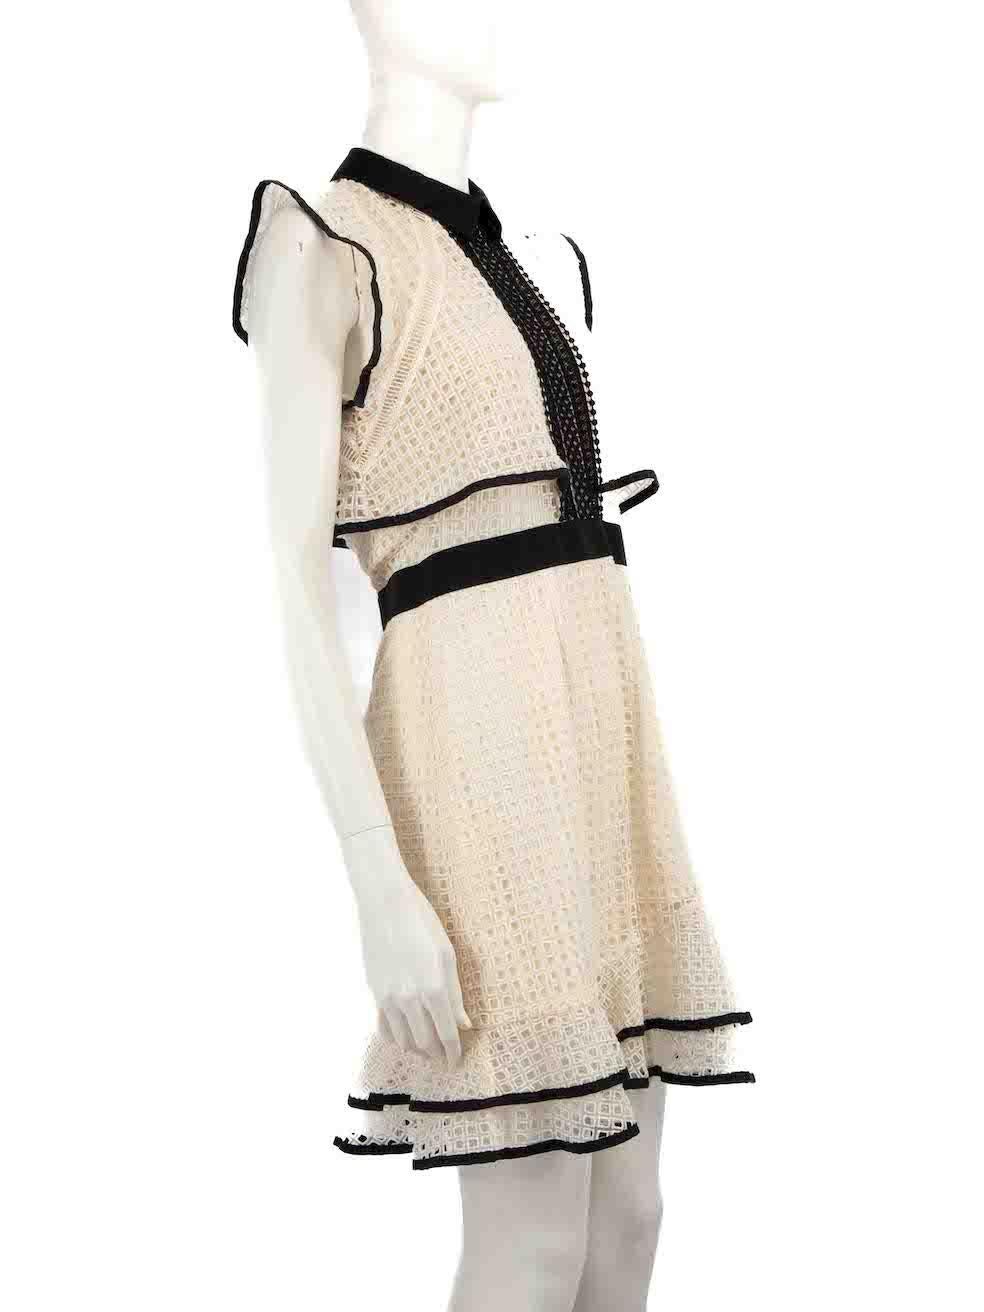 CONDITION is Very good. Hardly any visible wear to dress is evident on this used Self-Portrait designer resale item.
 
 
 
 Details
 
 
 Ecru
 
 Cotton
 
 Dress
 
 Sleeveless
 
 Knee length
 
 Round neck
 
 Black trim
 
 Sheer top
 
 Back hook and